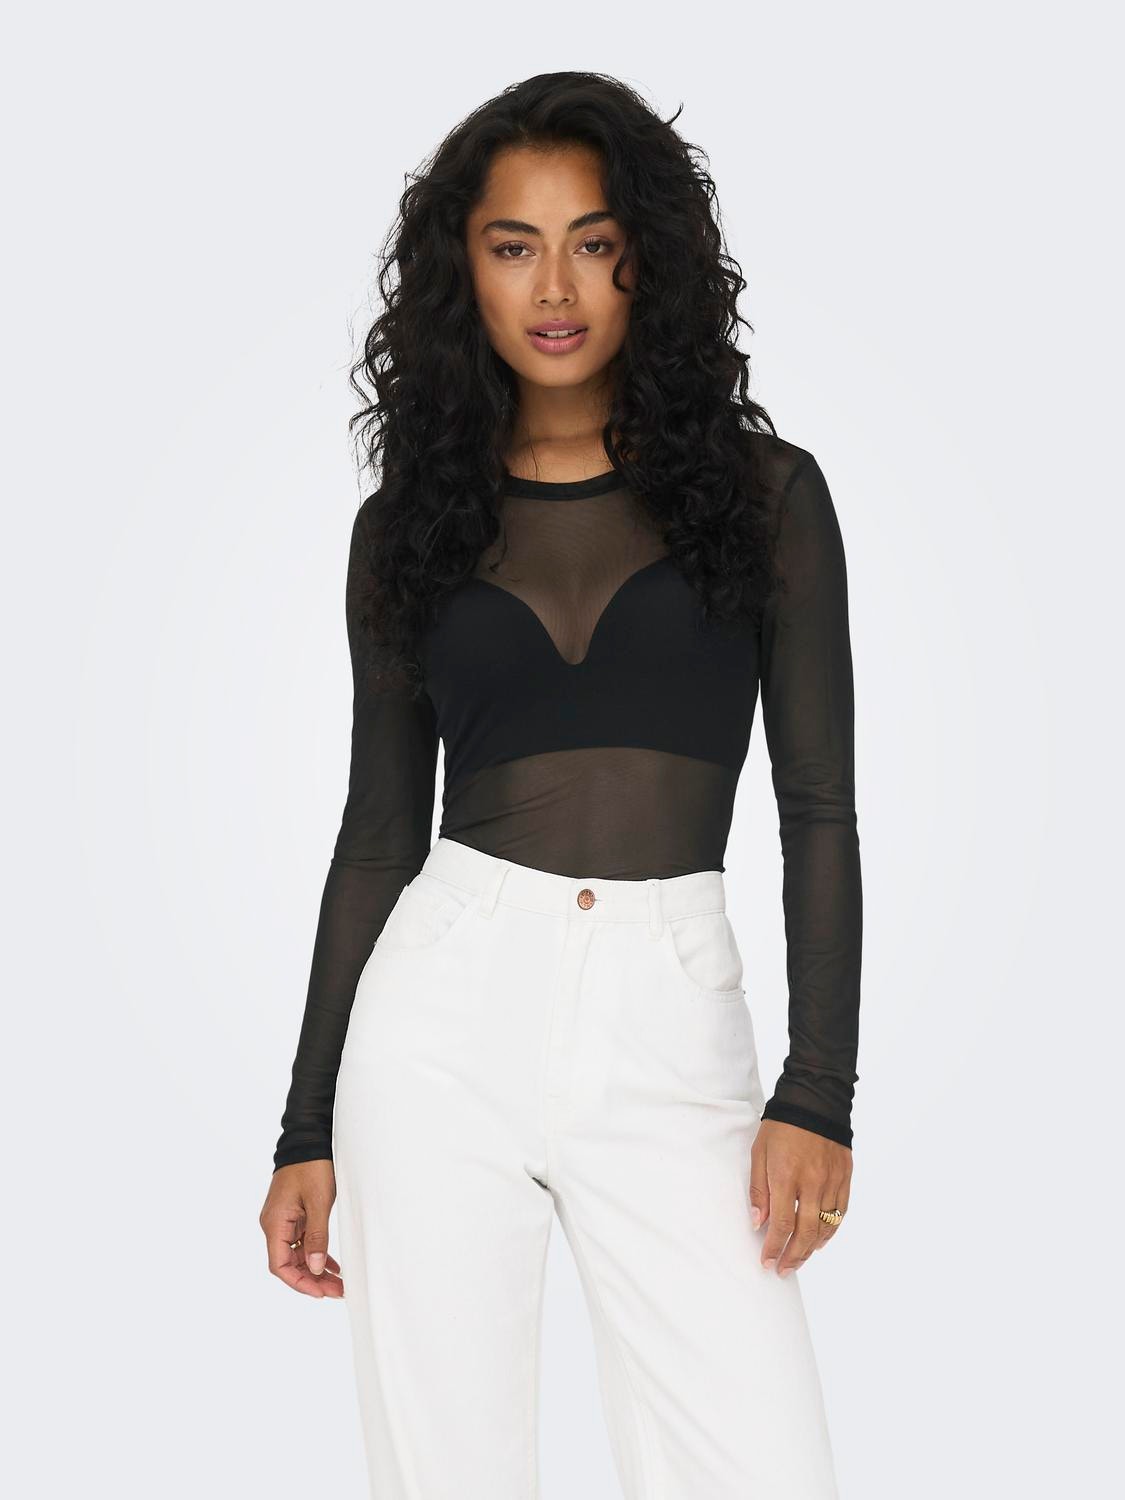 ONLY O-neck mesh top -Black - 15303787